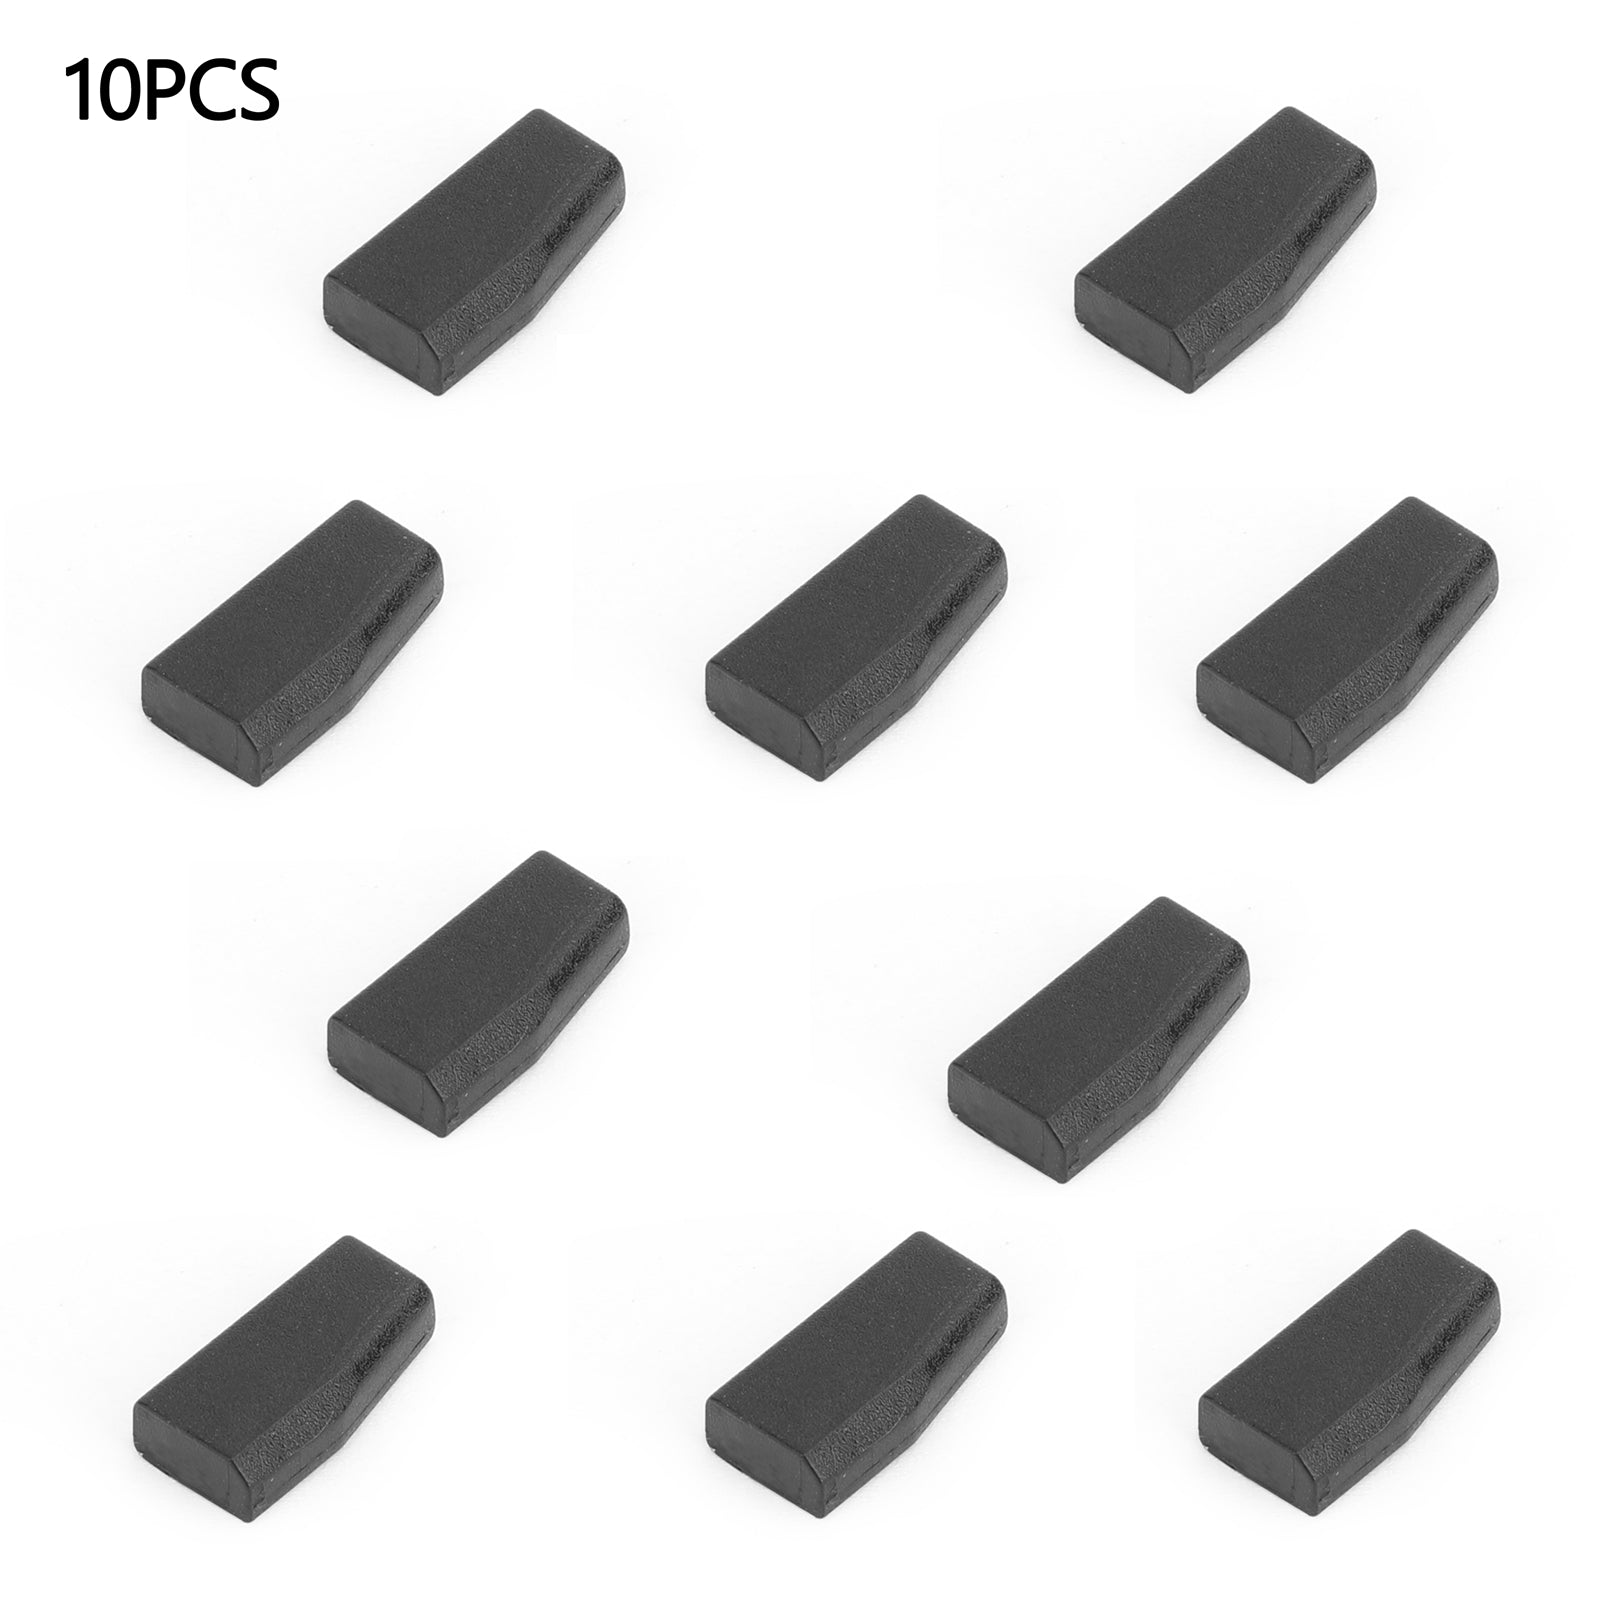 PCF7936 10pcs ID46 Chip PCF7936AS Blank Transponder (sostituisce PCF7936) Chiave generica compatibile